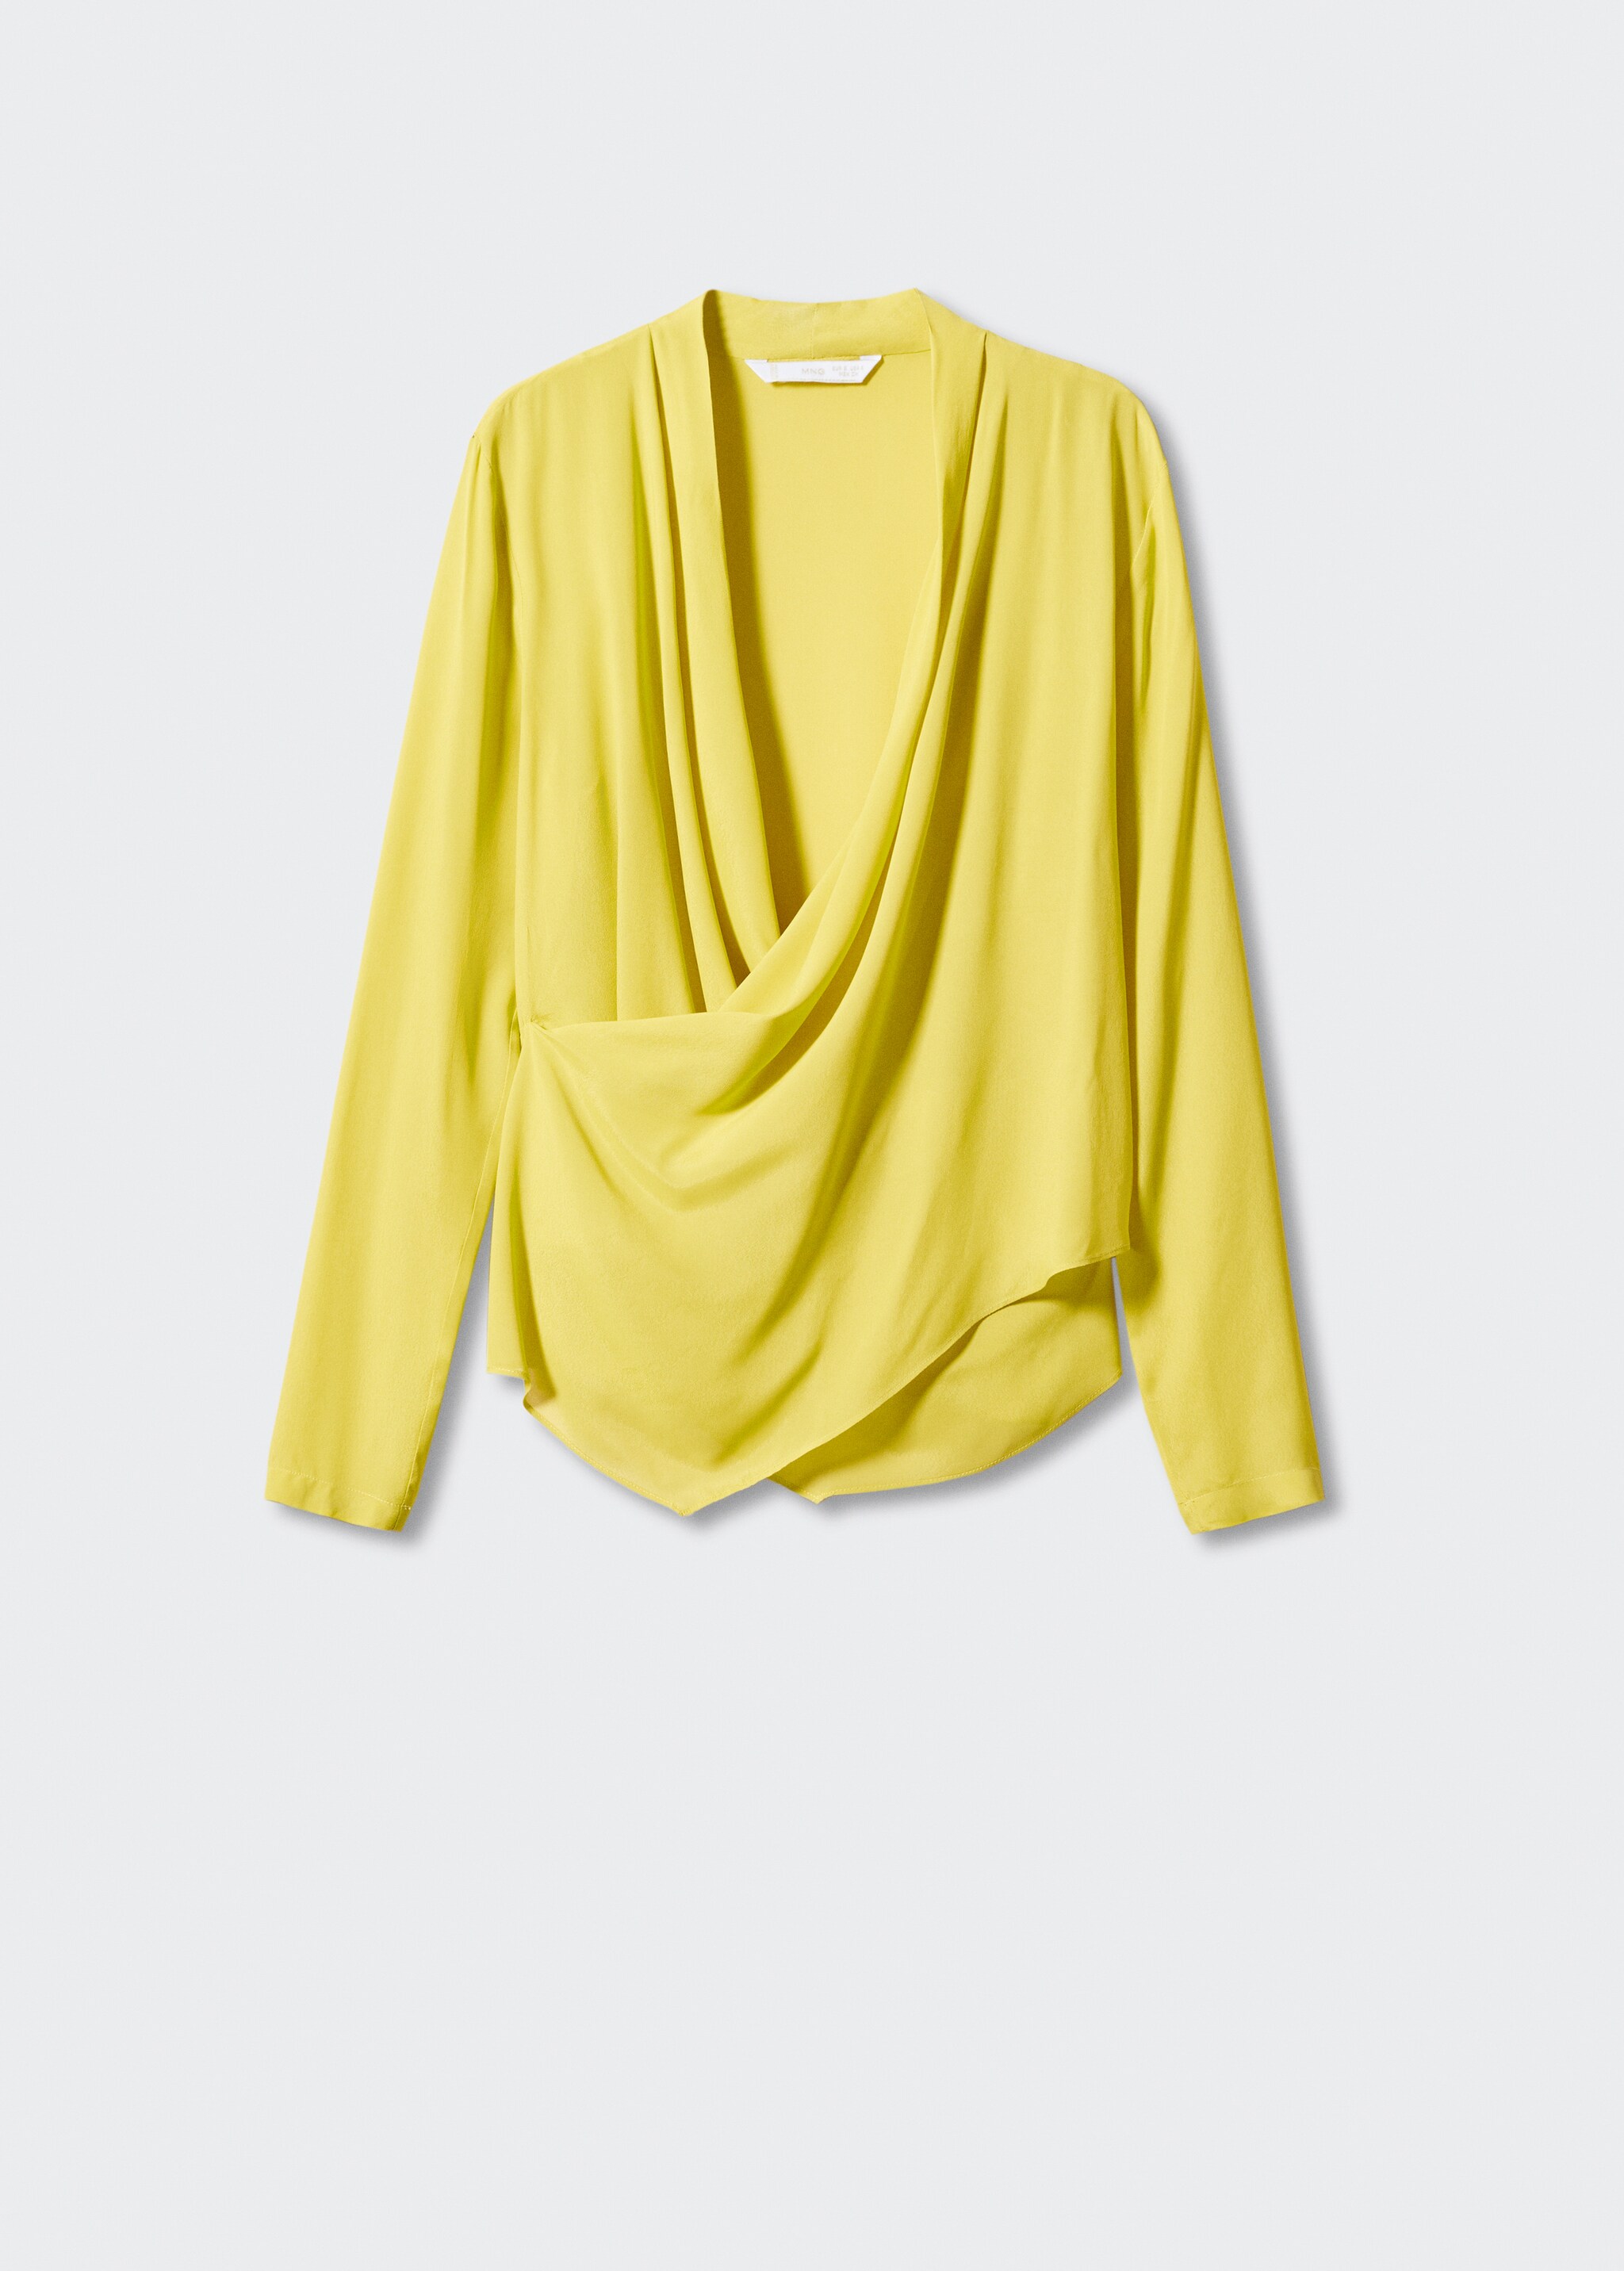 Draped crossover neckline blouse - Article without model